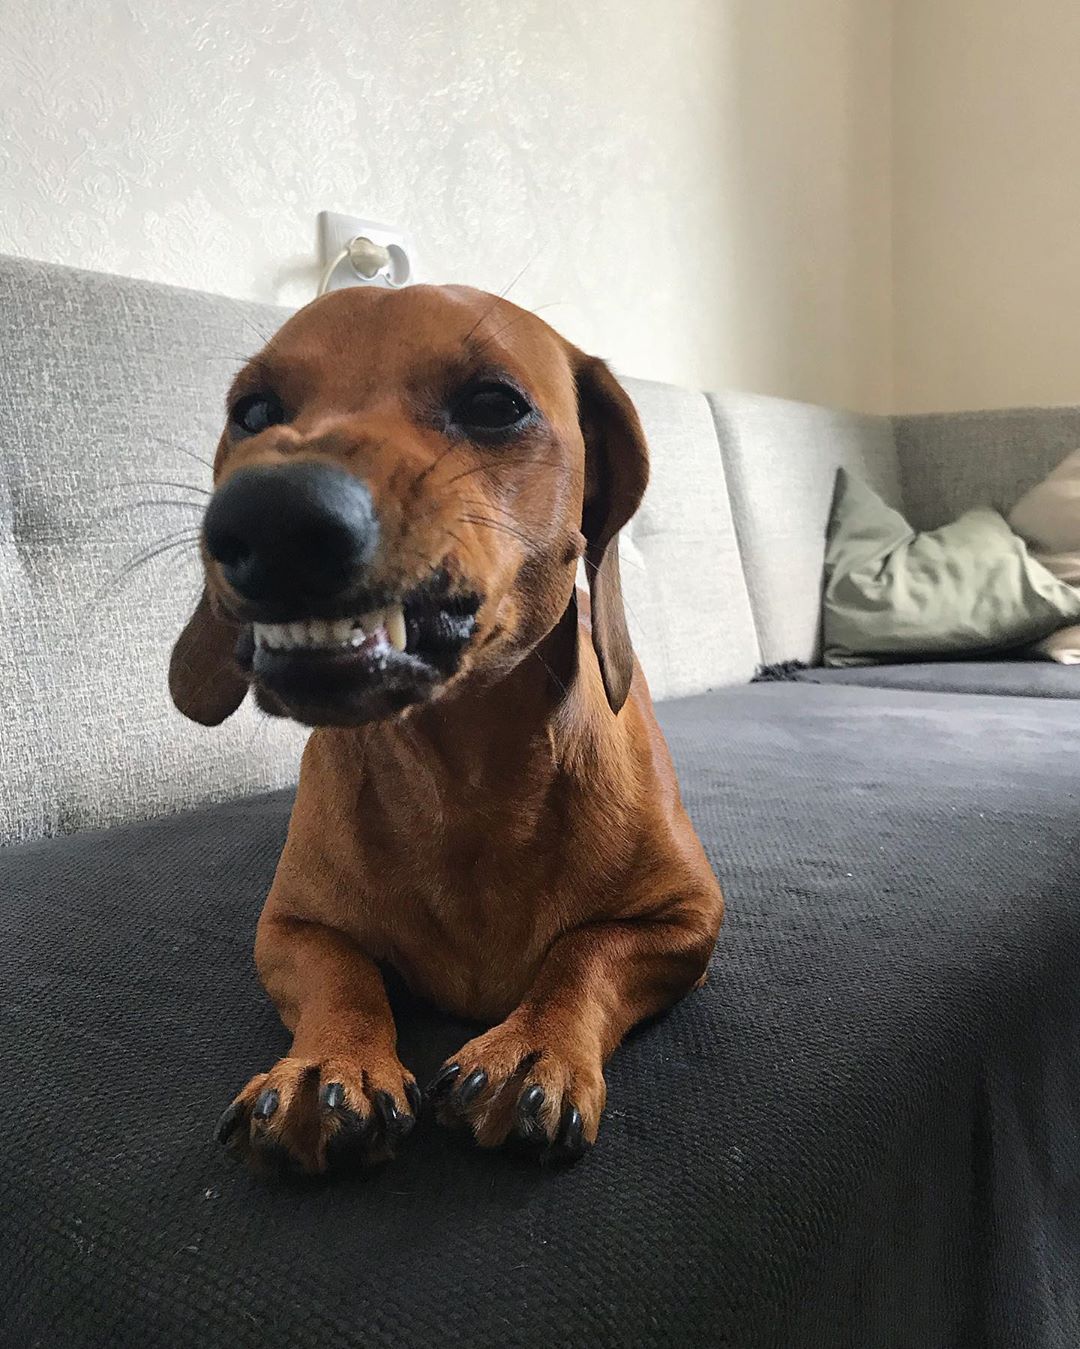 Dachshund lying down on the couch with its forced growl